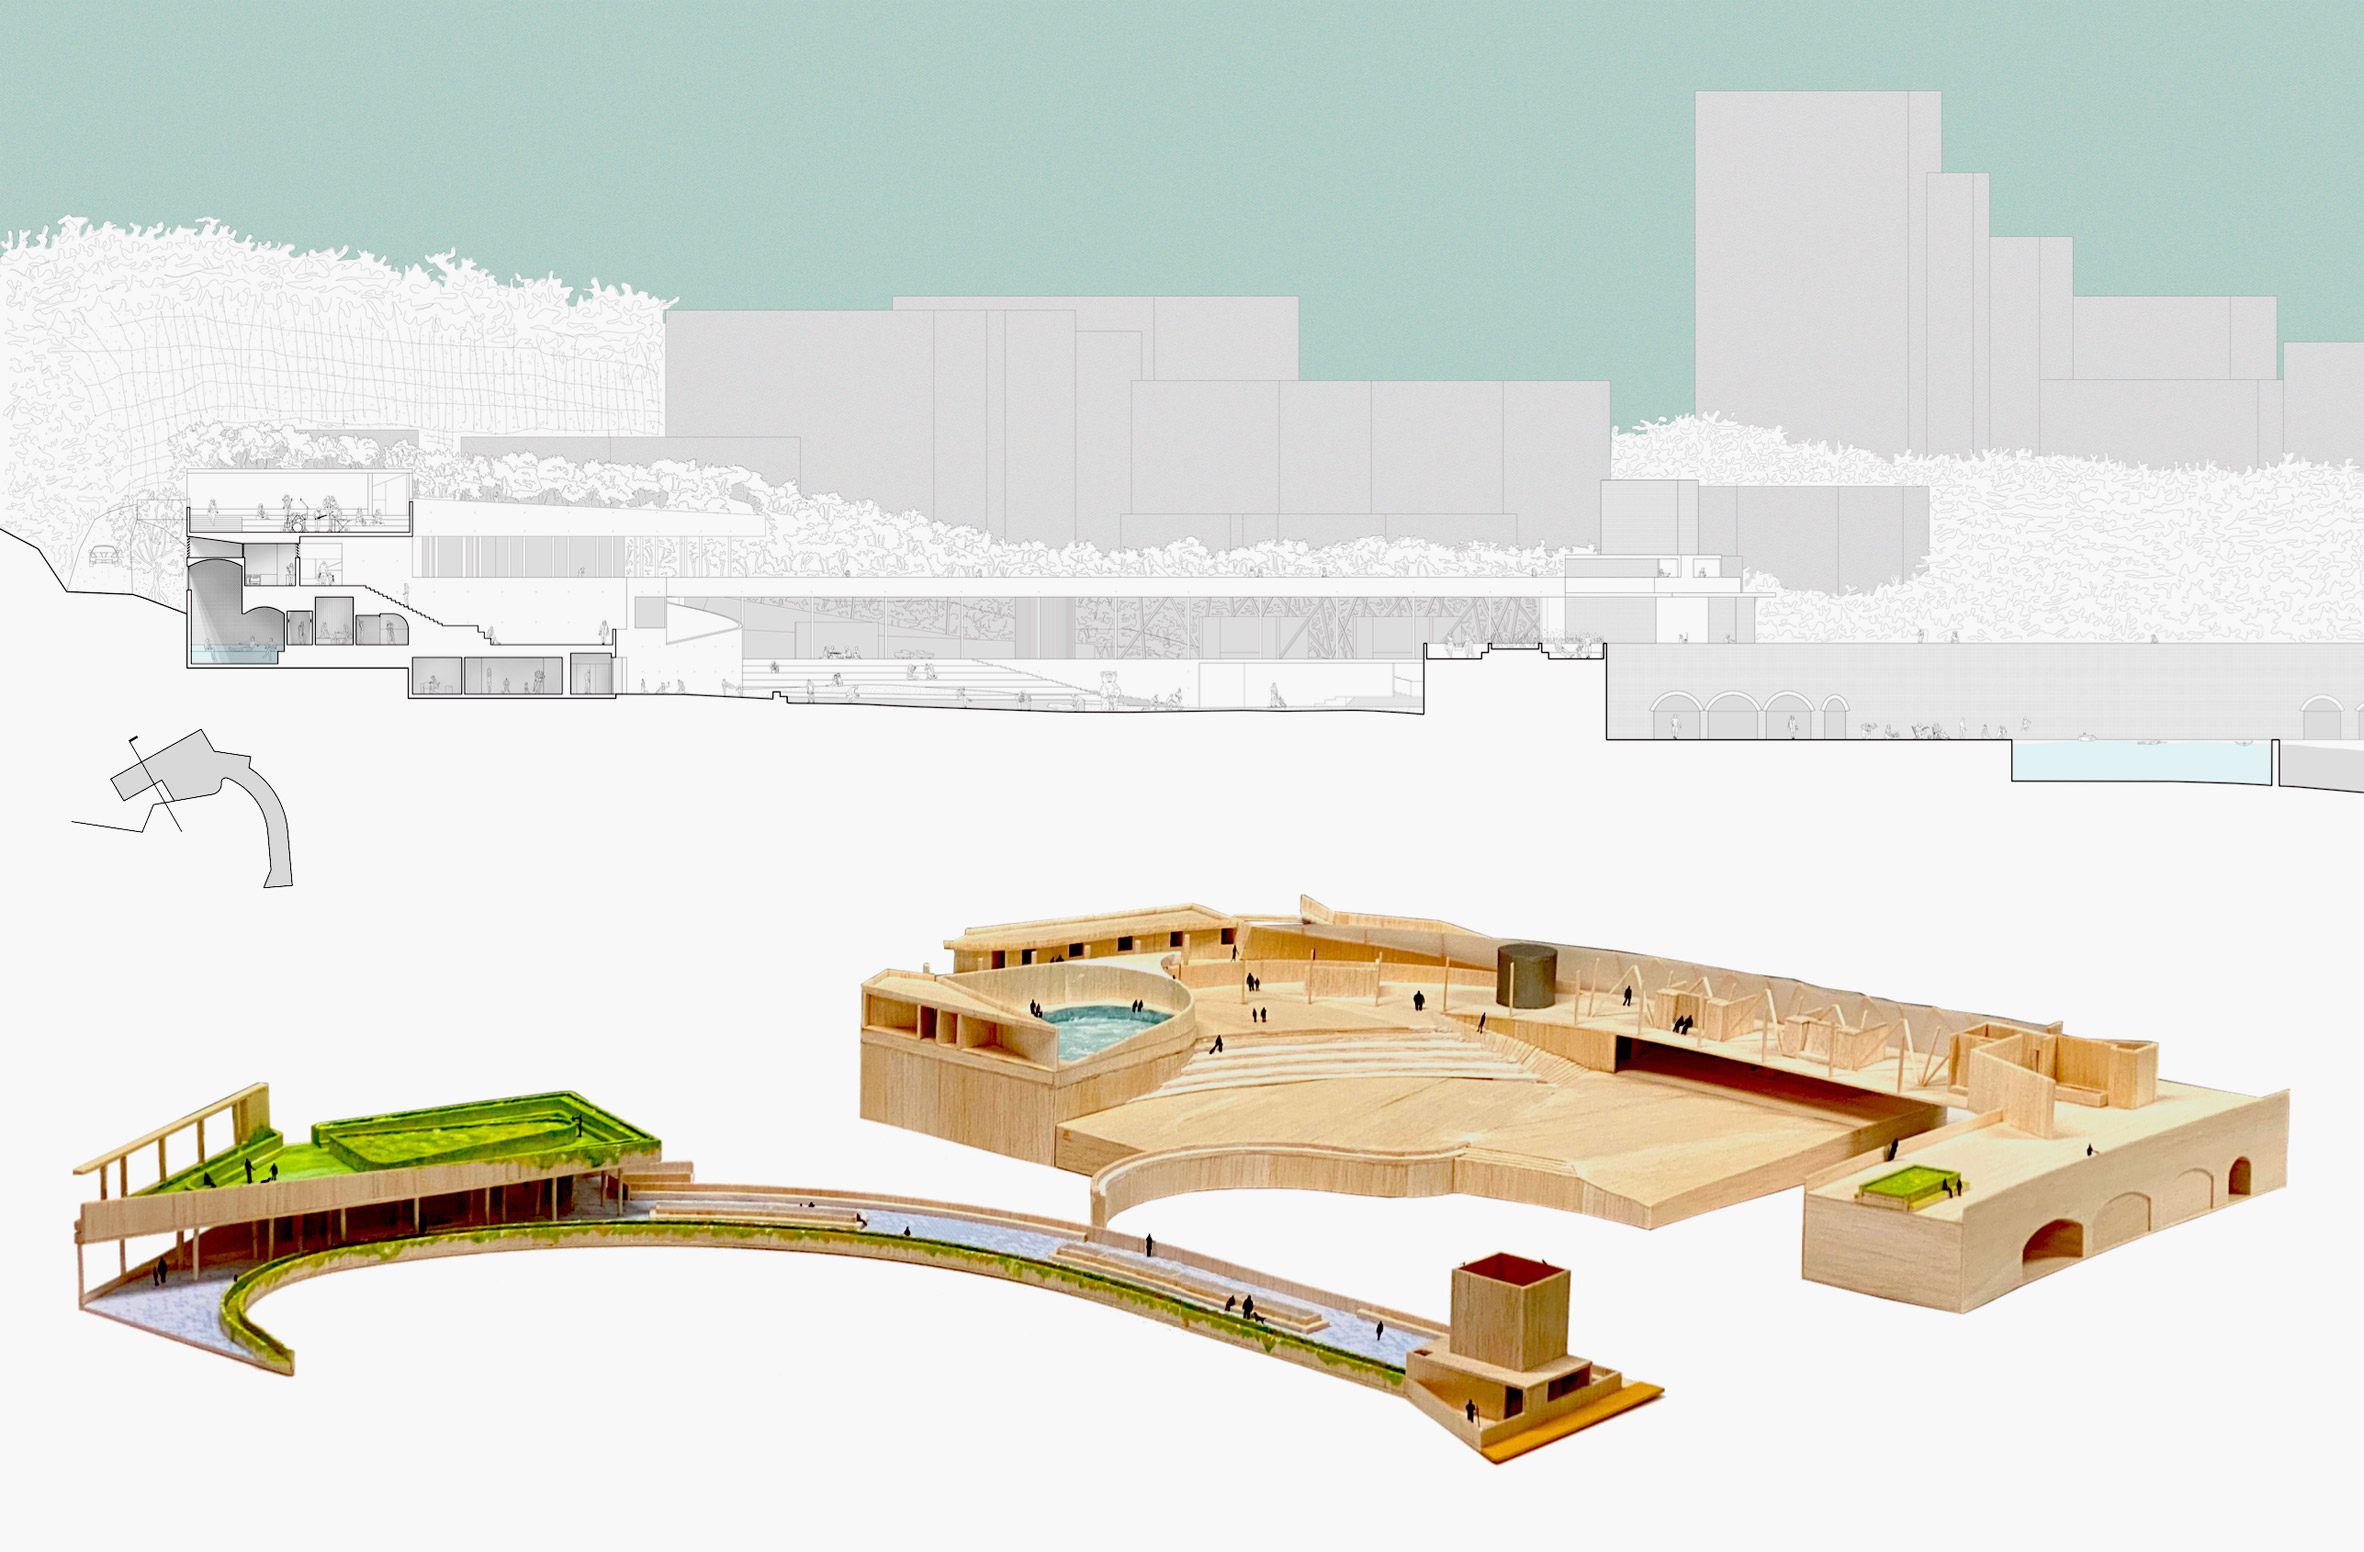 Model and sectional drawing showing site built into hillside